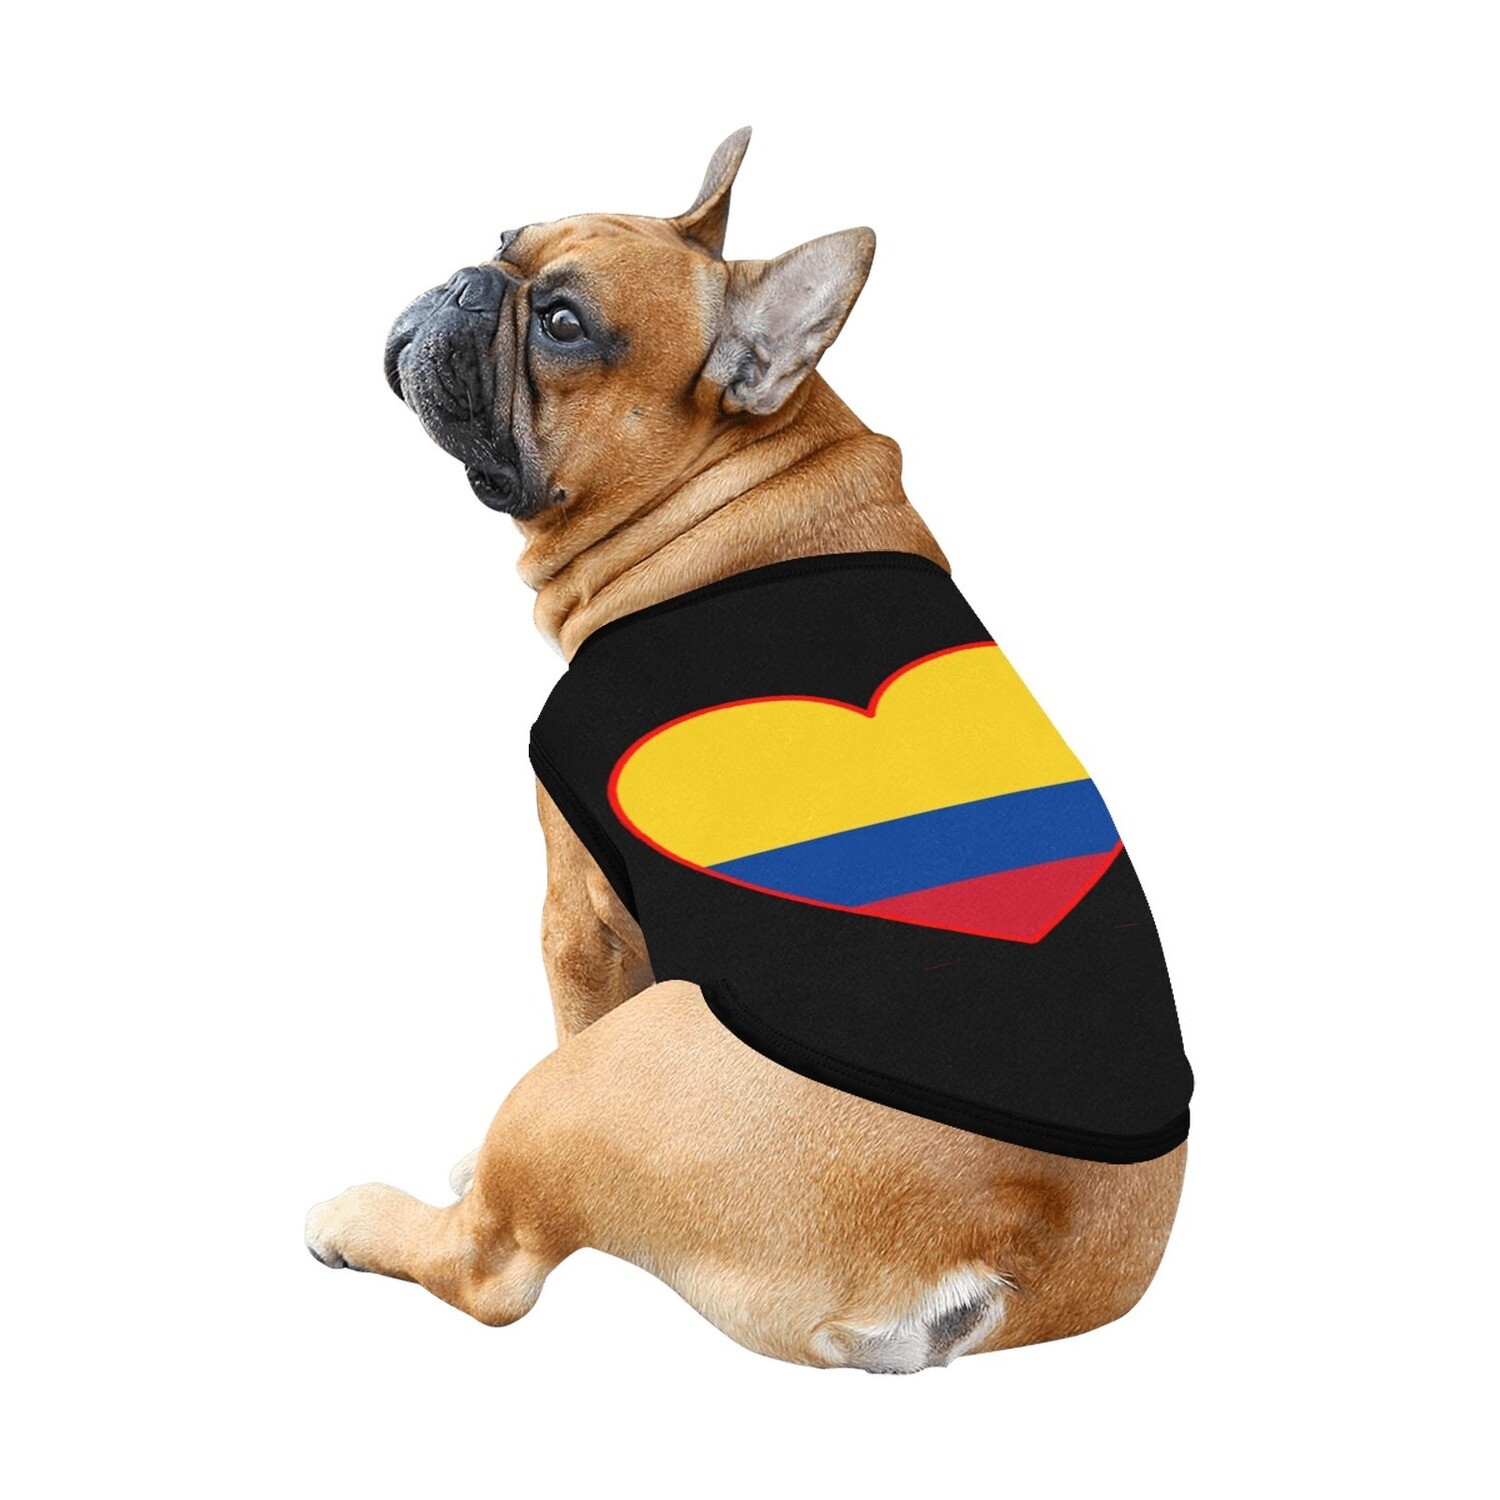 🐕🇨🇴 I love Colombia dog t-shirt, dog gift, dog tank top, dog shirt, dog clothes, gift, 7 sizes XS to 3XL, Colombian flag, heart, black